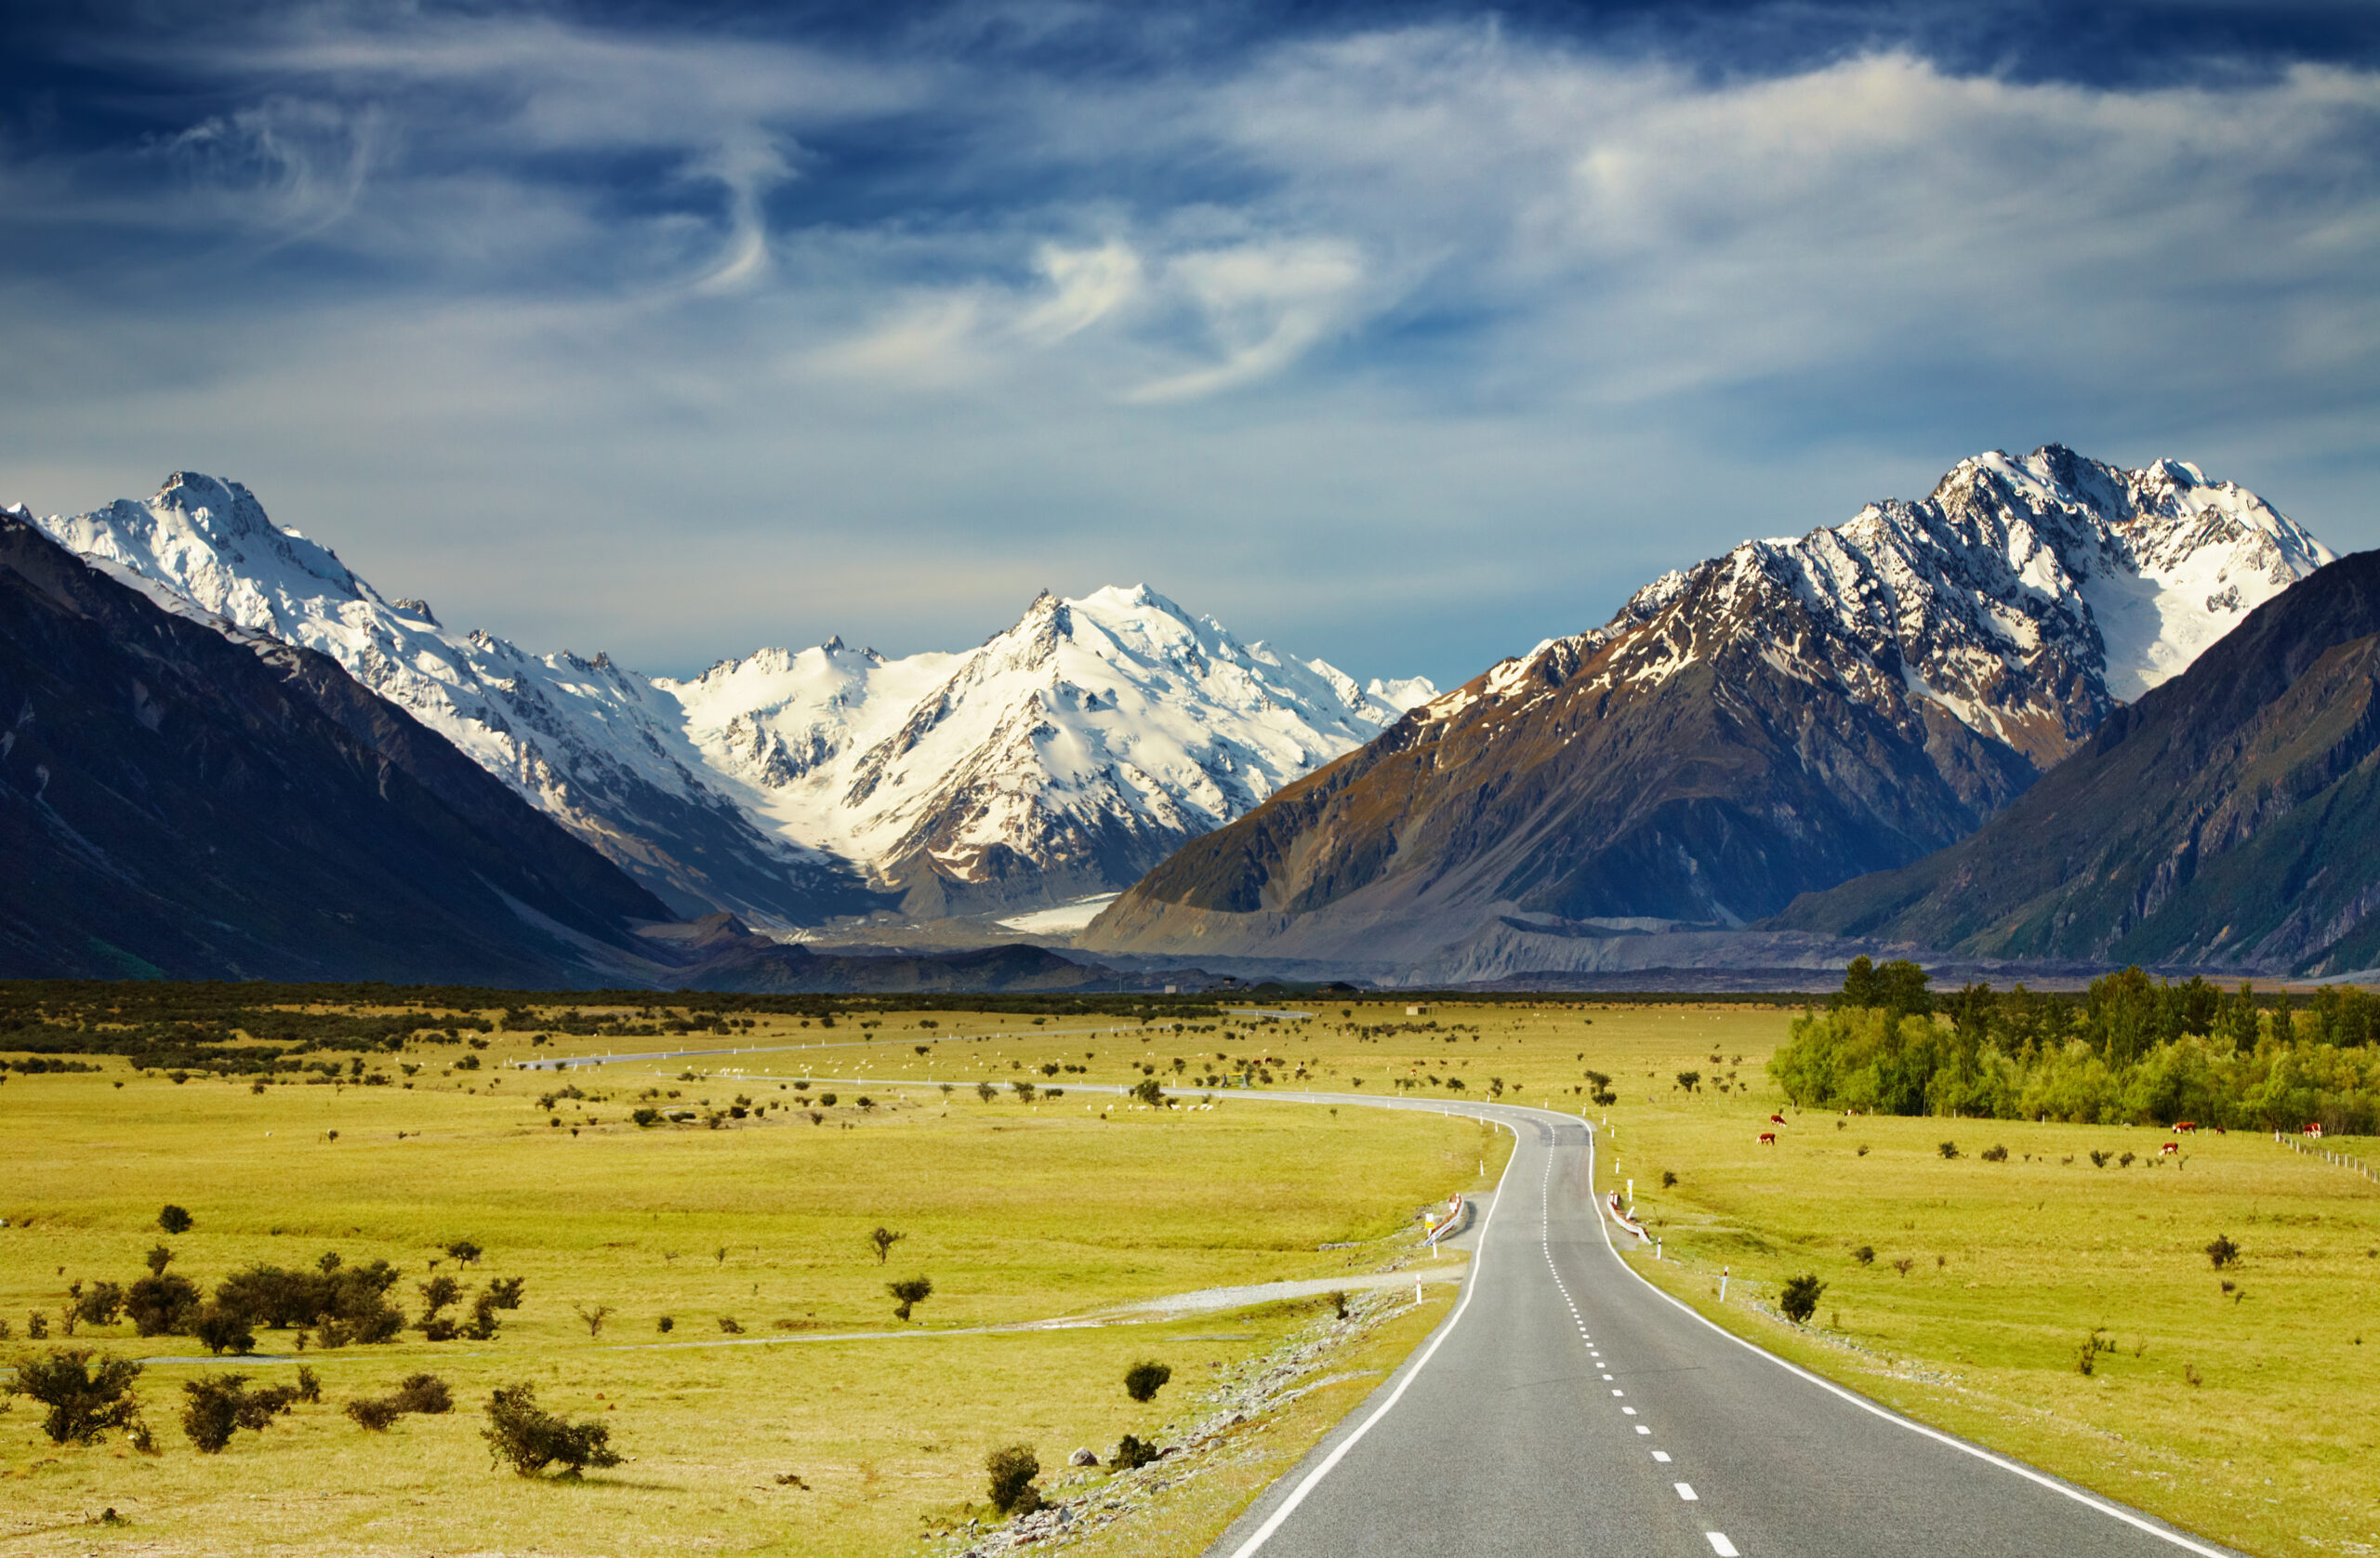 <p>If you want to enjoy solo hikes in an almost fairytale-like environment, New Zealand is just the place for you. This travel destination offers many beautiful sights, from majestic mountains to captivating landscapes. As far as safety is concerned, you’ll also have little to worry about here.</p>